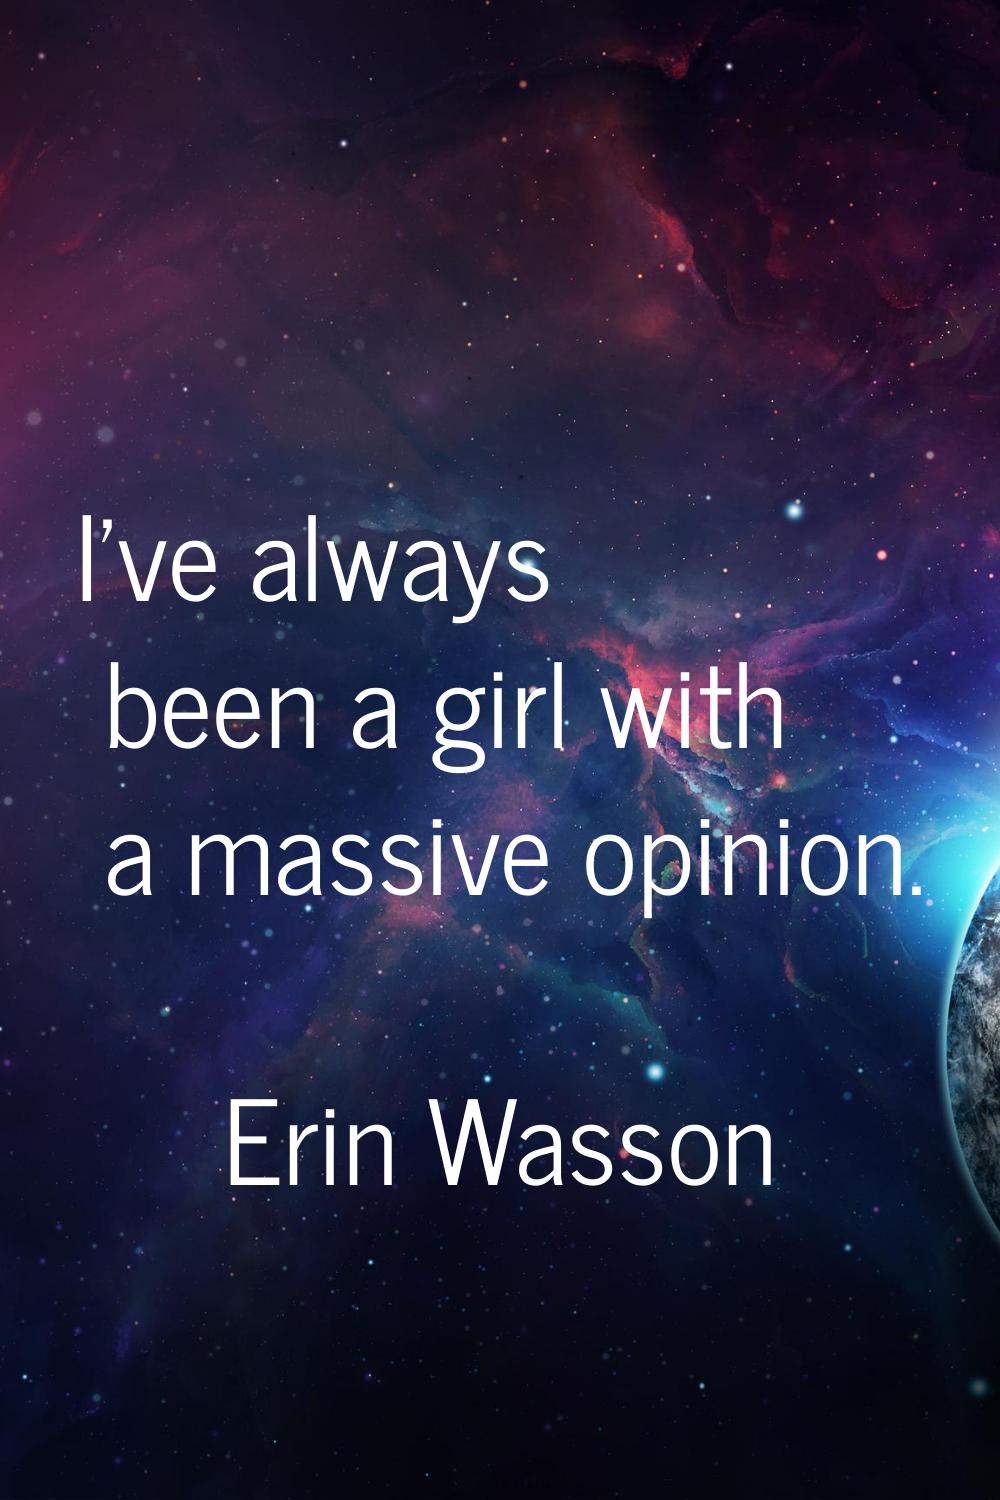 I've always been a girl with a massive opinion.